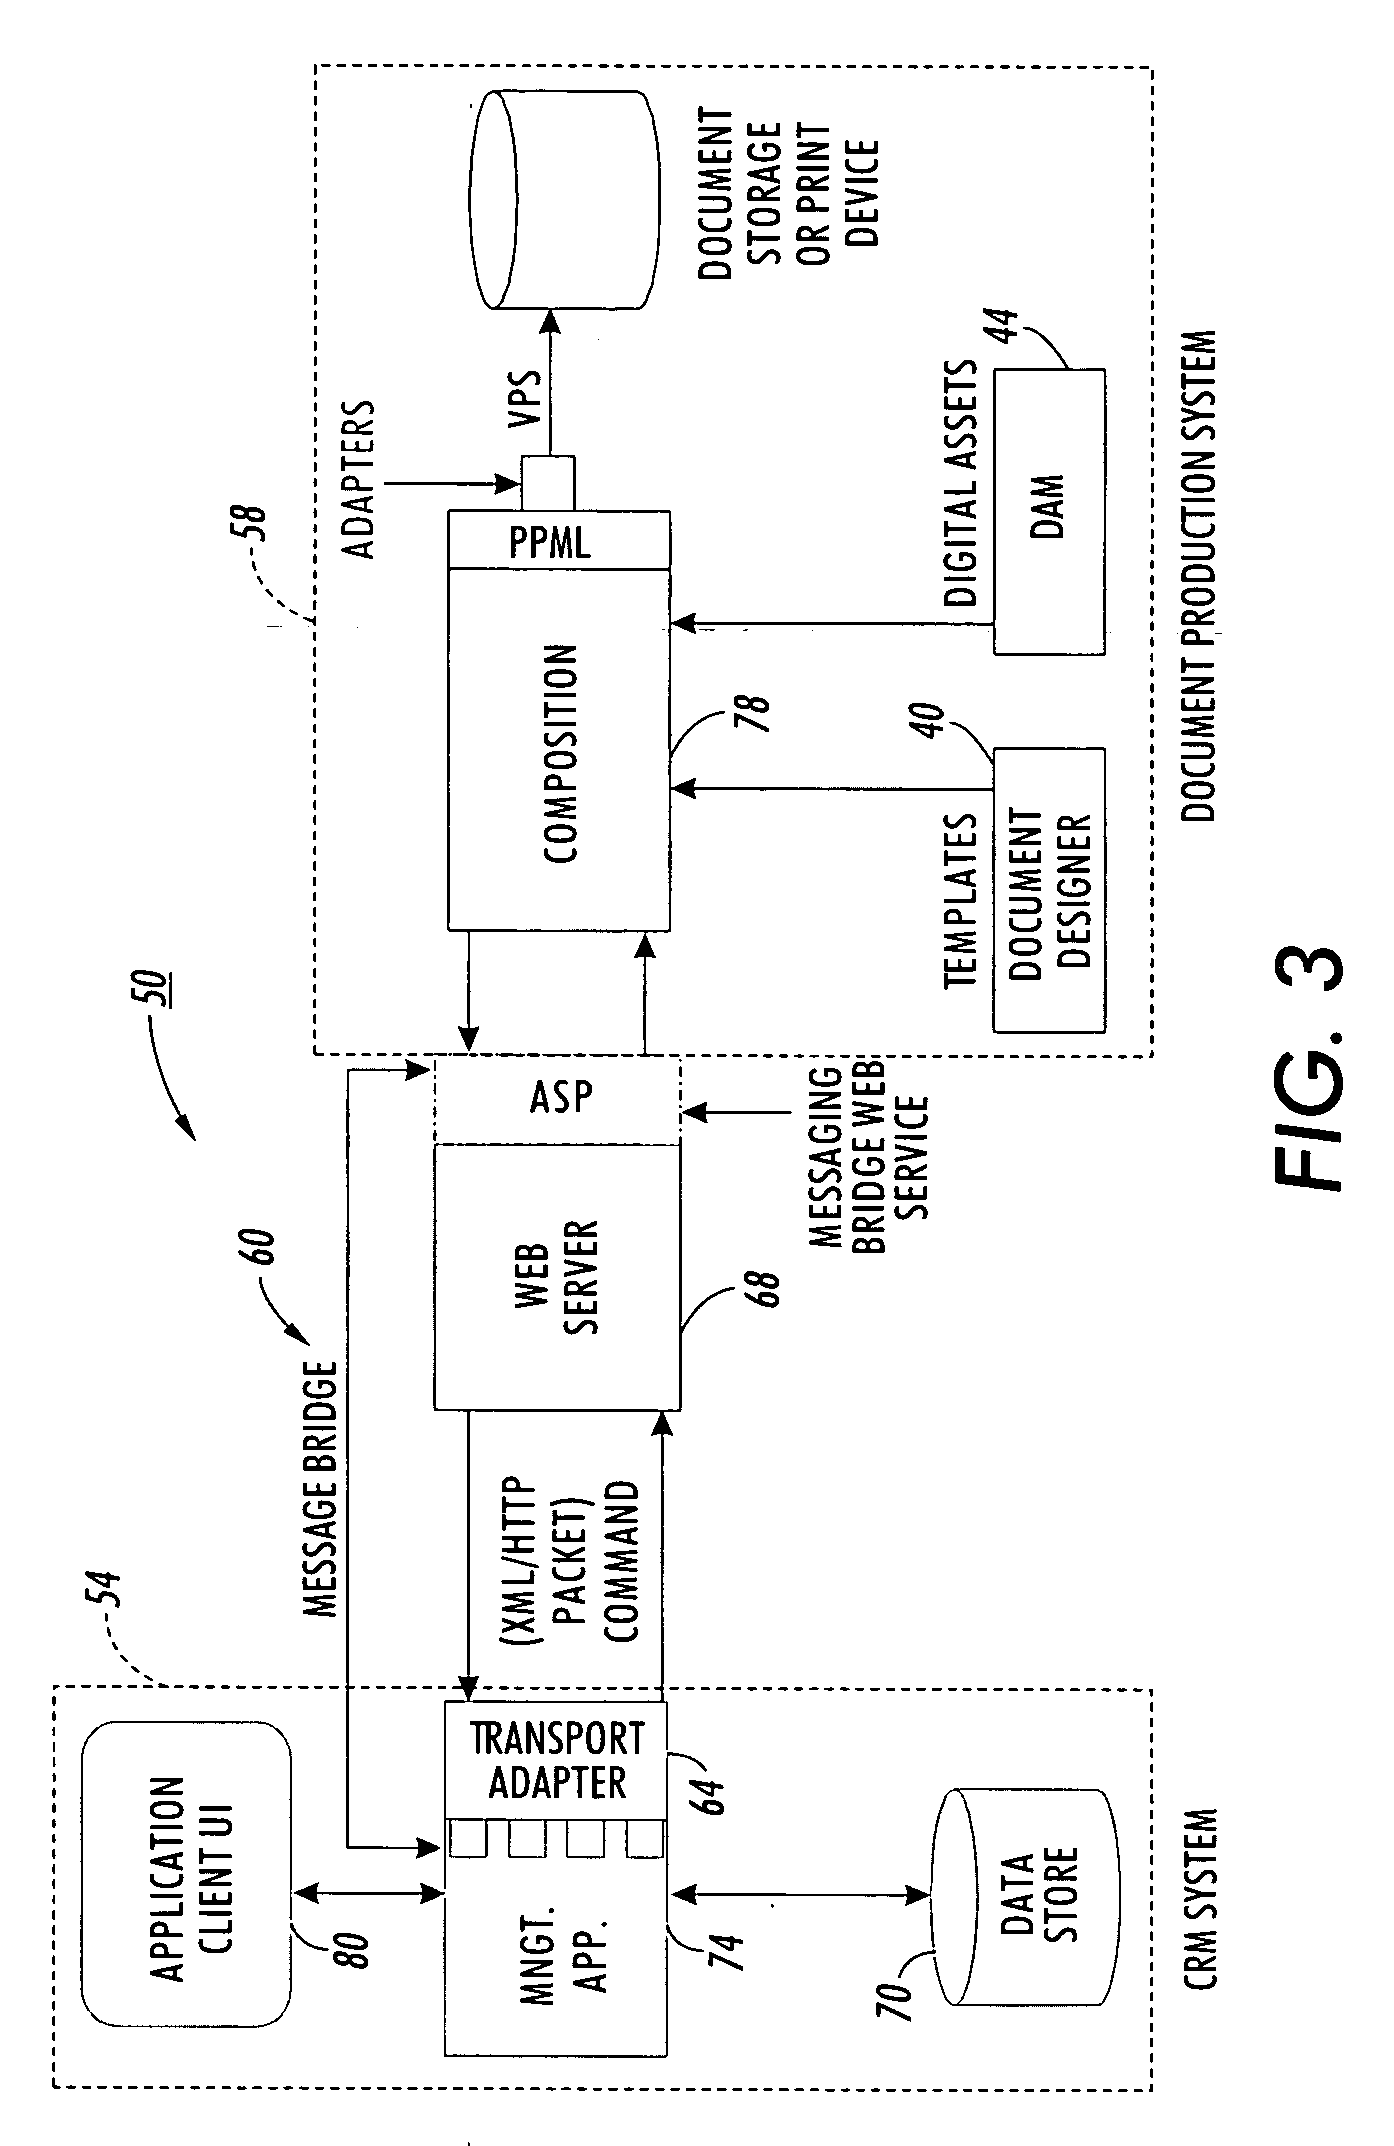 Method and system for integrated production of documents using variable data from a data management system